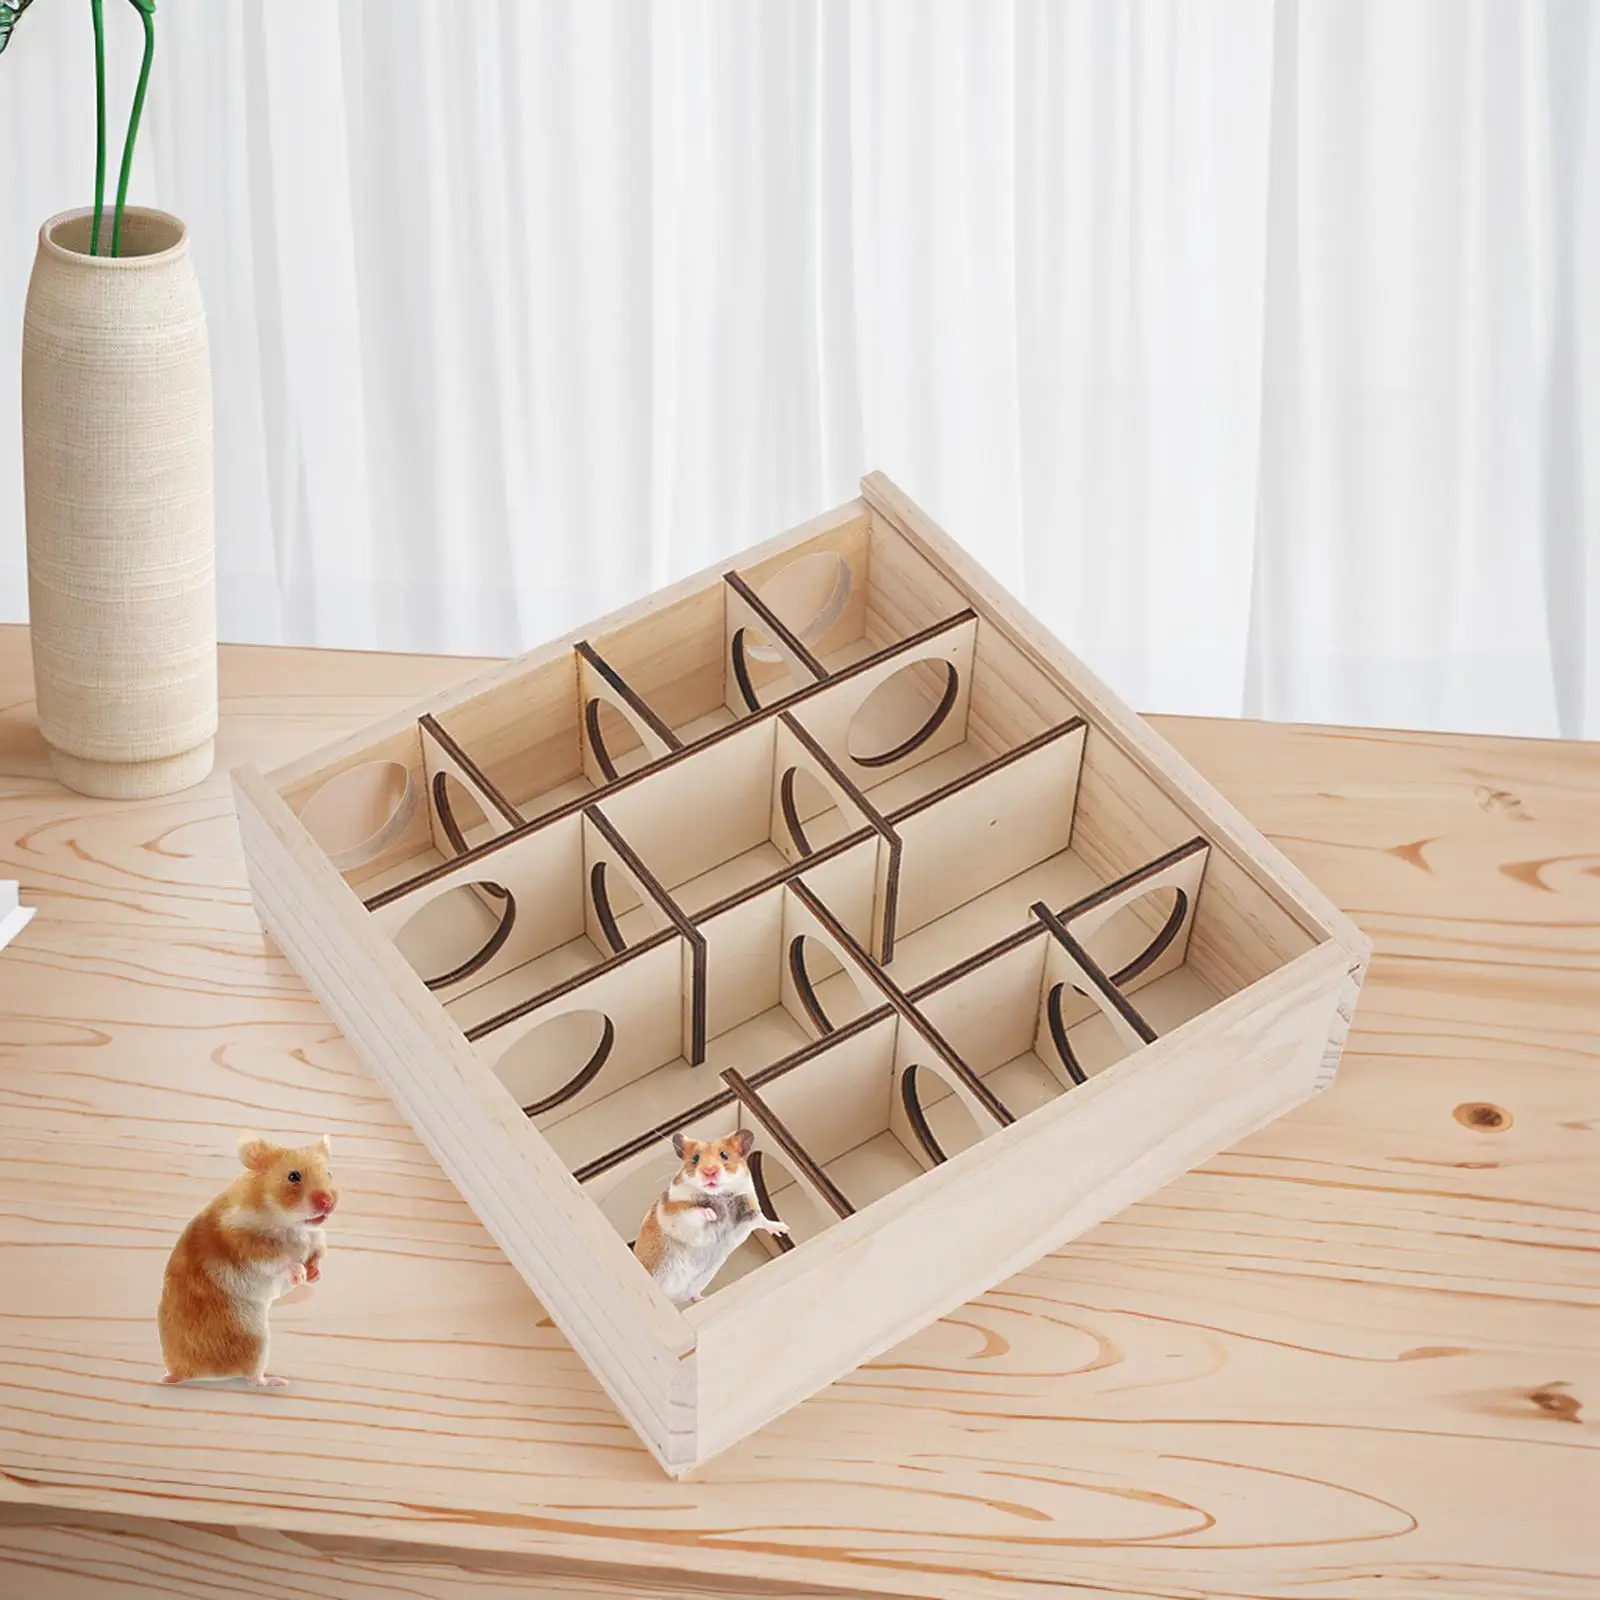 Hamster House Wooden Maze Hamster Cage Accessories Pet Supplies Exercise Hideout for Small Animals Tiny Gerbils Dwarf Hamsters